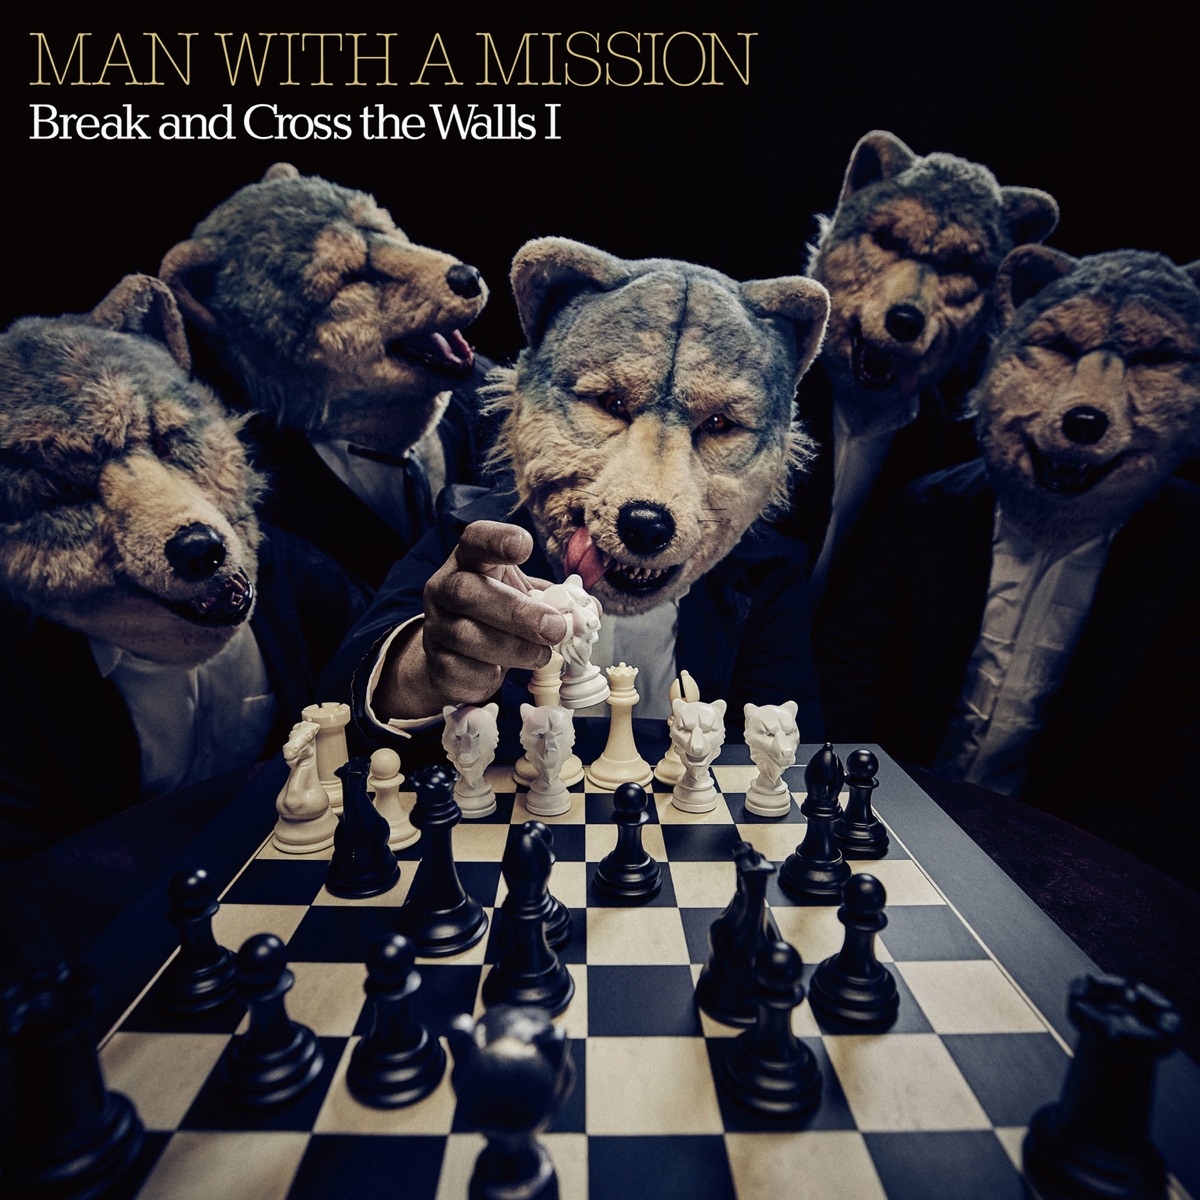 MAN WITH A MISSION - yoake